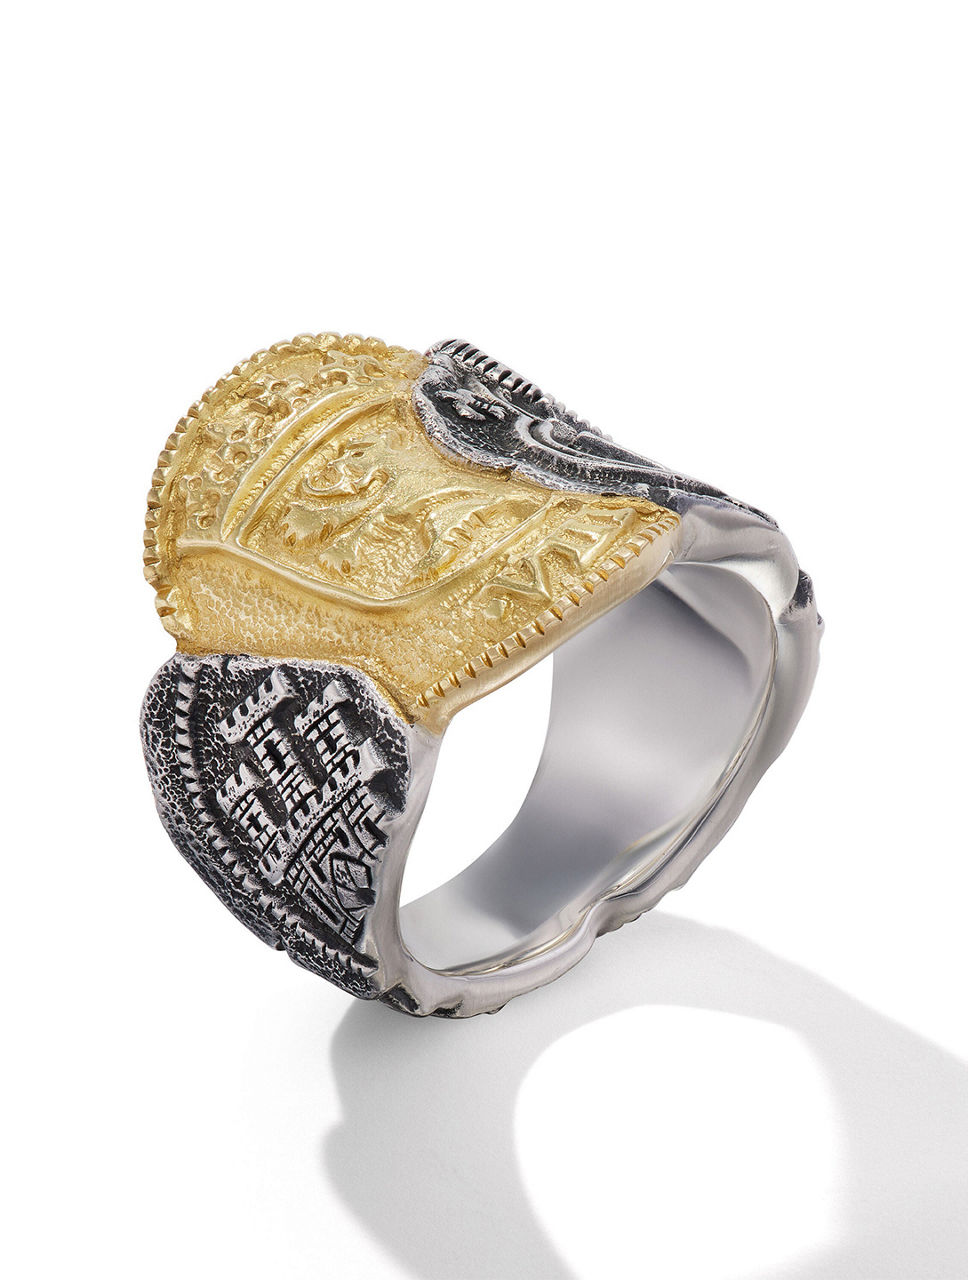 Shipwreck Cigar Band Ring Sterling Silver With 18k Yellow Gold, 15mm